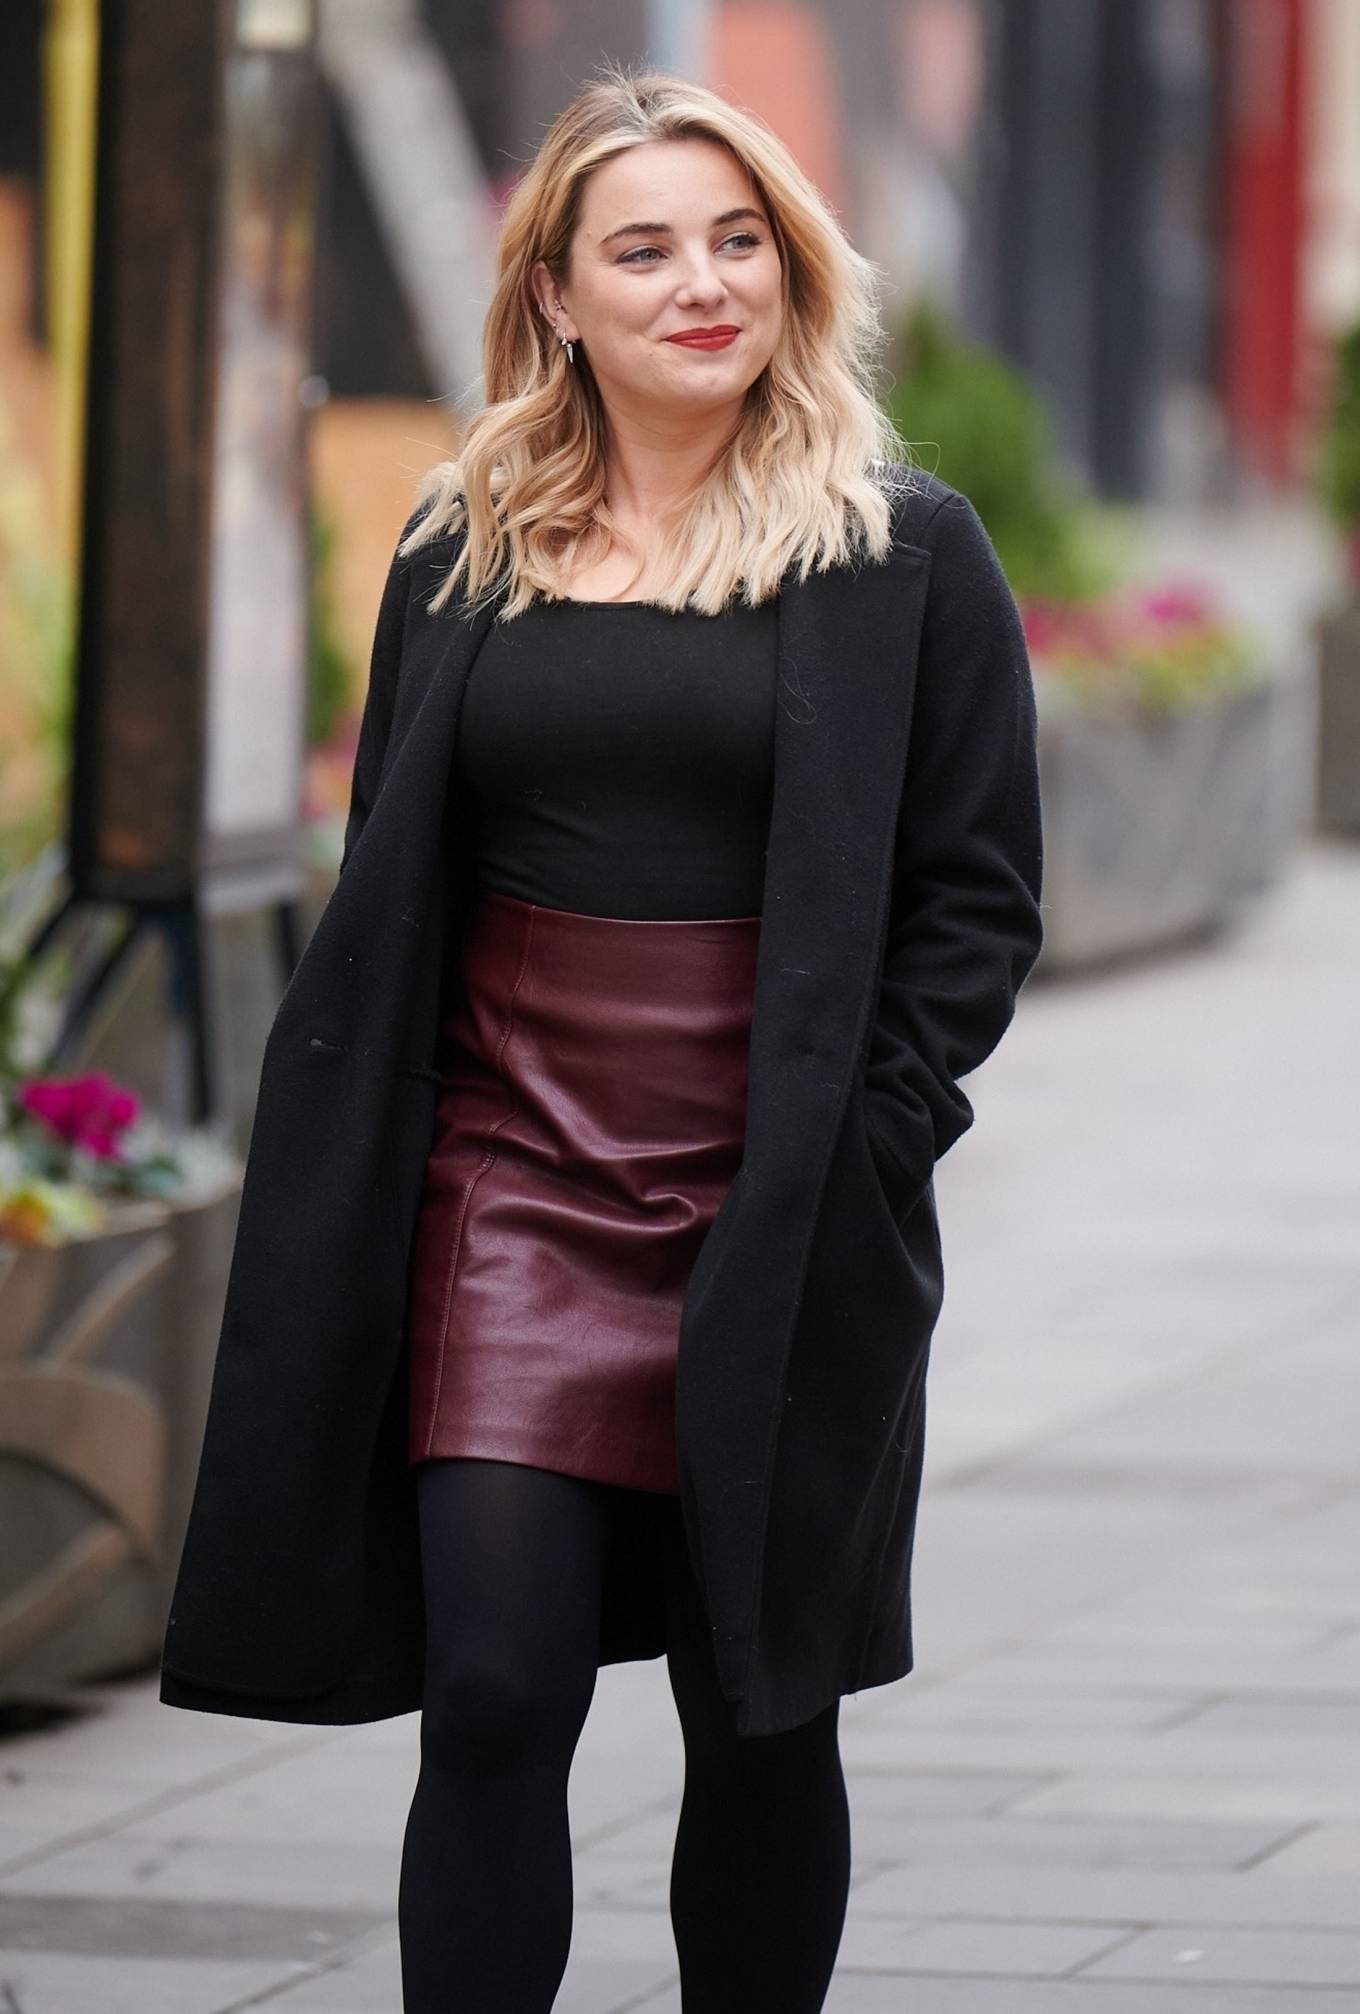 Sian Welby 2020 : Sian Welby – Pictured outside Capital Radio in London-09